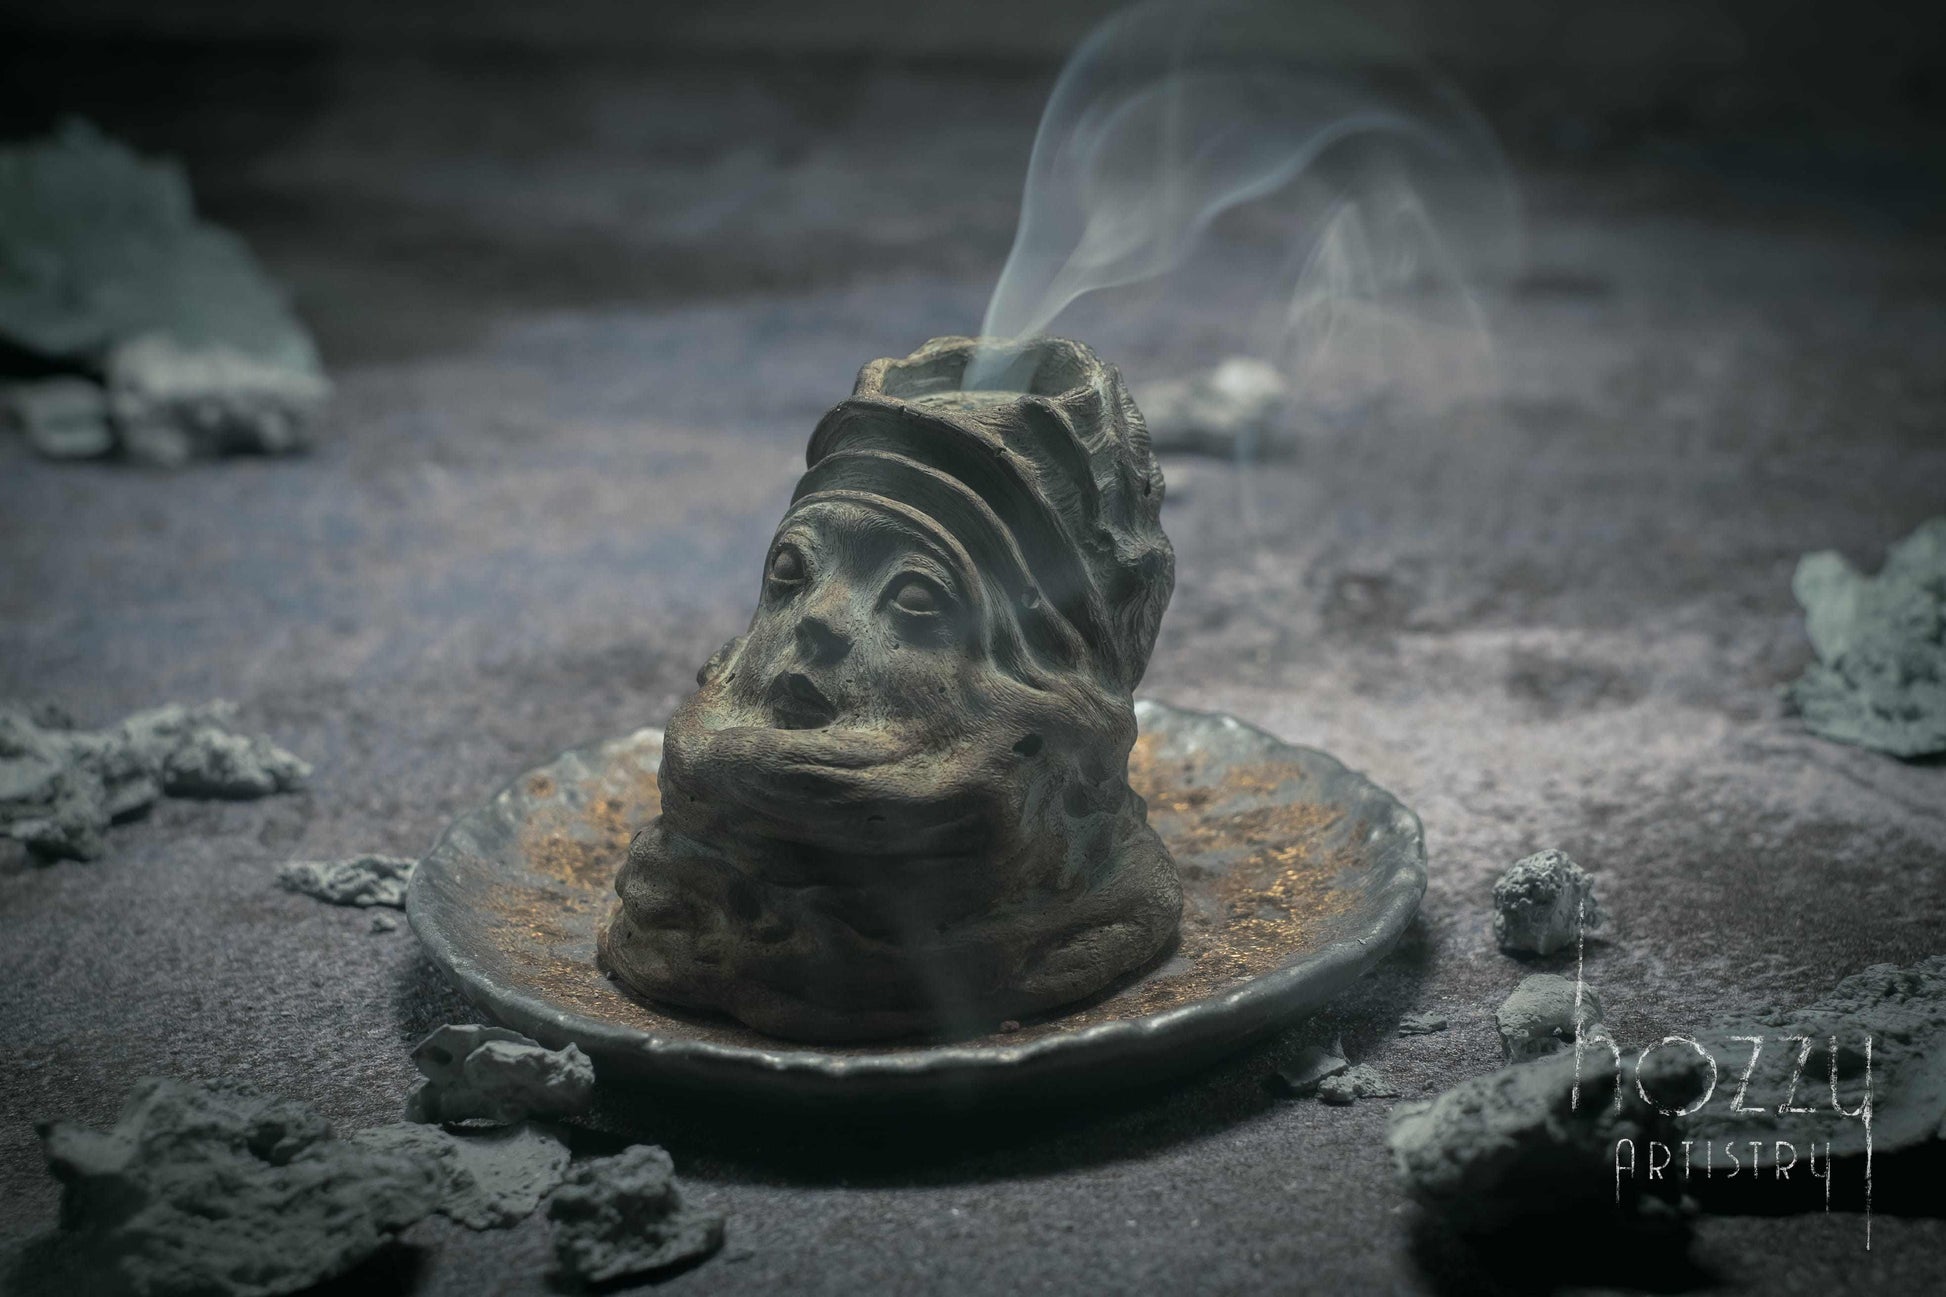 Ancient MysteriesProduct Description
If you're a fan of mysterious styles, you won't want to miss out on this design! Check out our unique incense holder shaped like an ancient ruinsHOZZY Artistry StoreHOZZY Artistry Store